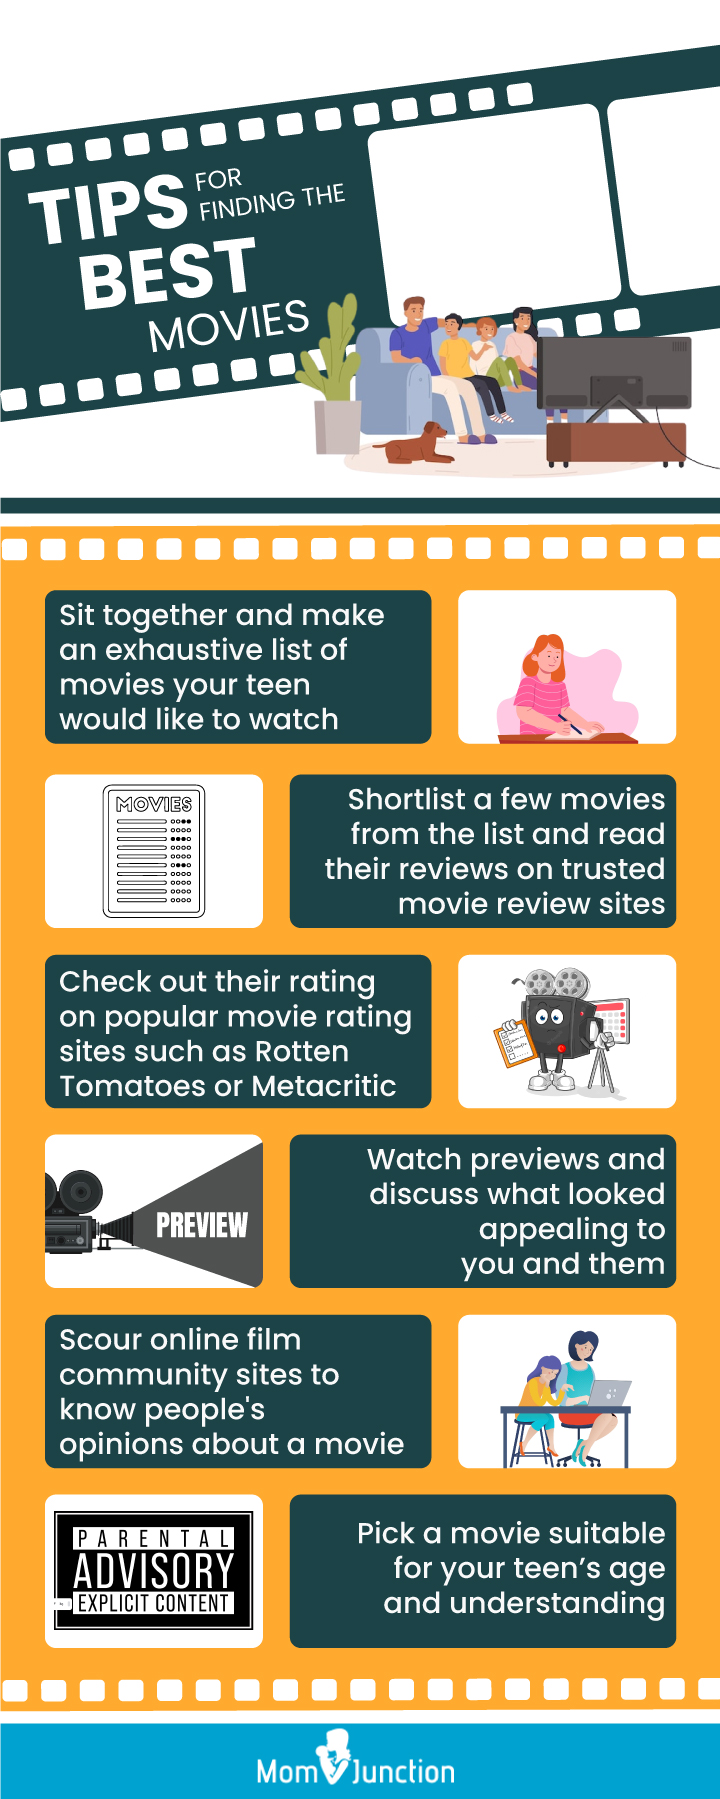 tips for finding the best movies [infographic]